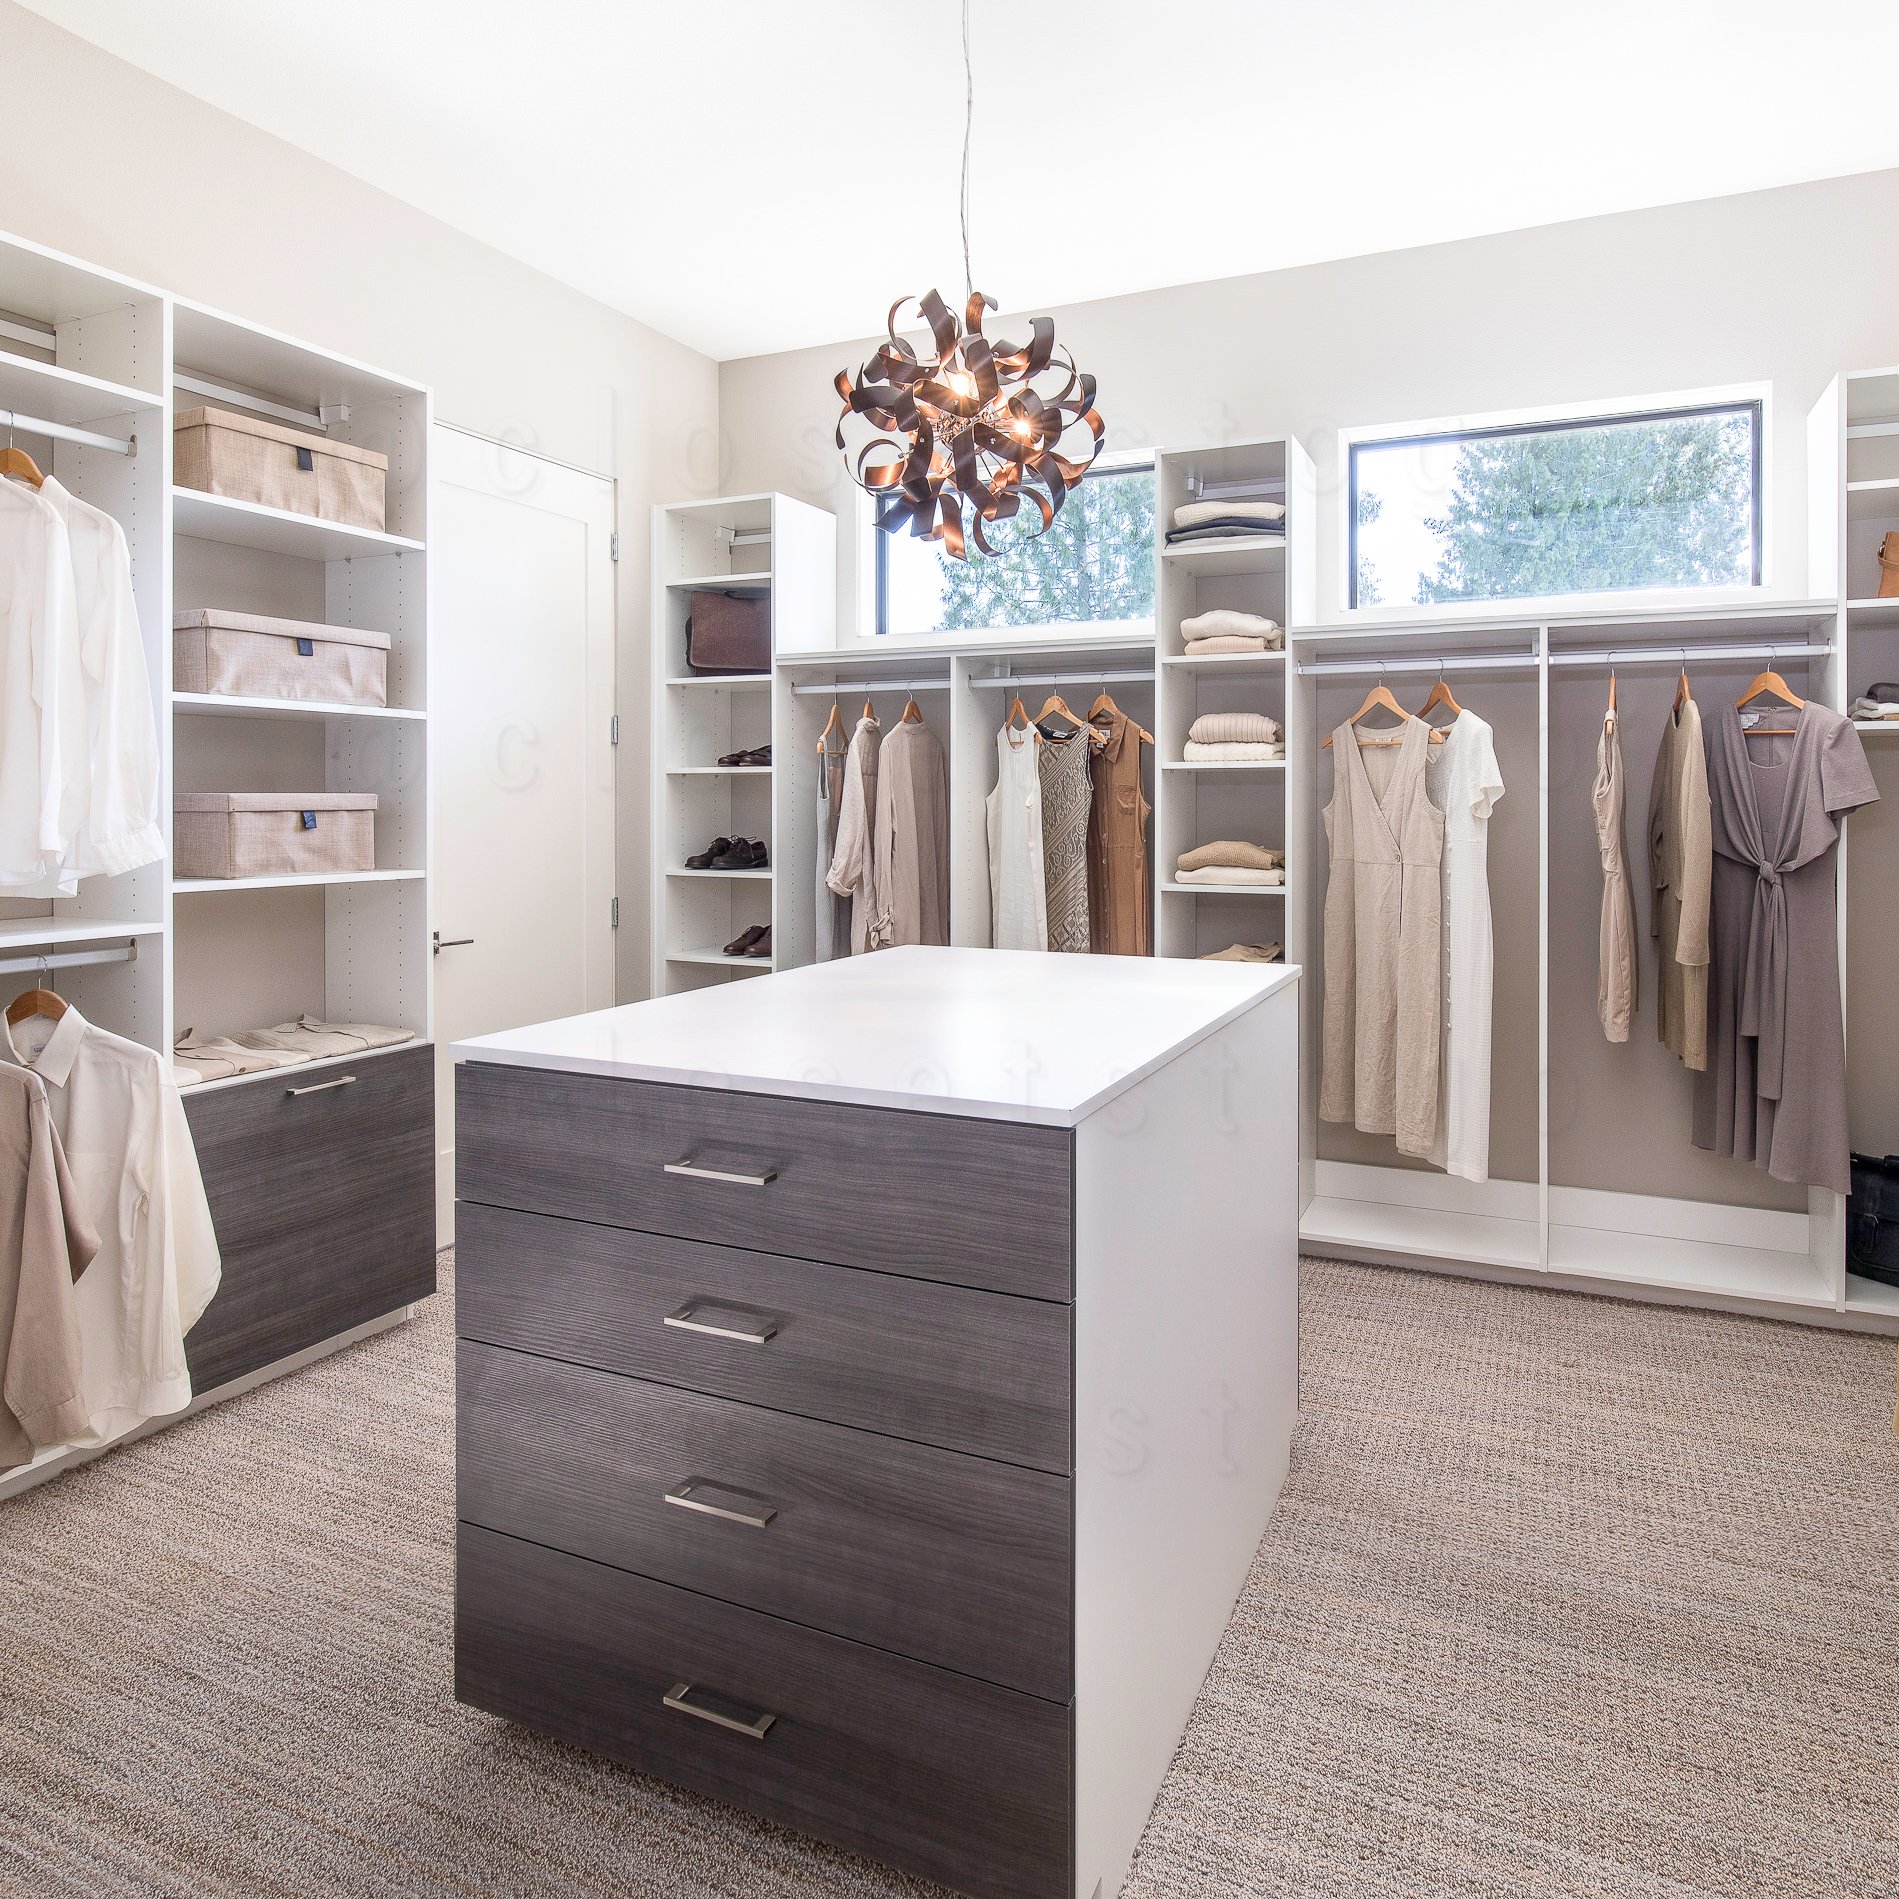 A walkin two toned closet with grey and white, with a center island and shelves, long hang and short hang